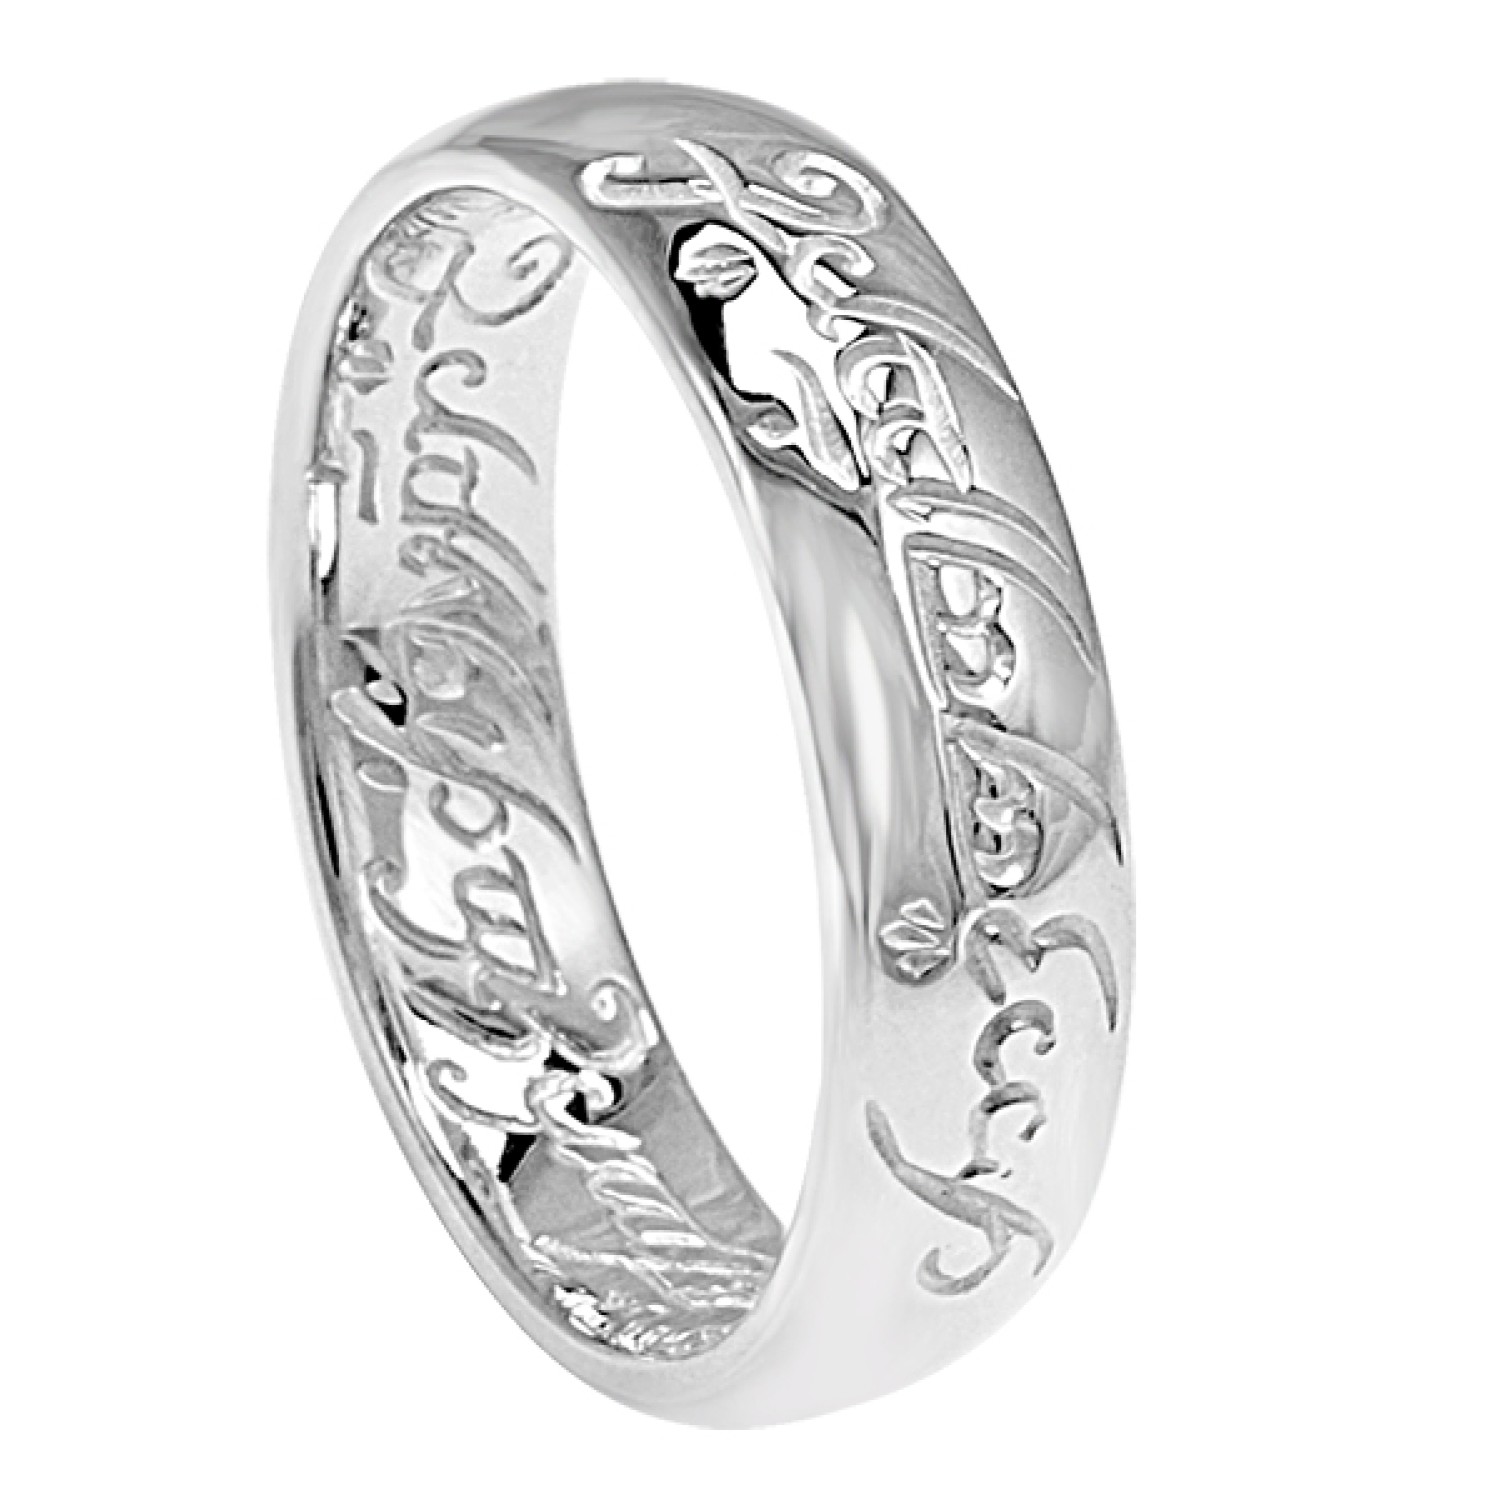 LoTR One Ring Heavy Engraving Sterling Silver. One ring to rule them all,One ring to find them,One ring to bring them all and in the darkness bind them. Heavy Engraving with Elvish Runes. The Official Lord of the Rings One Ring handcrafted here in Middle 